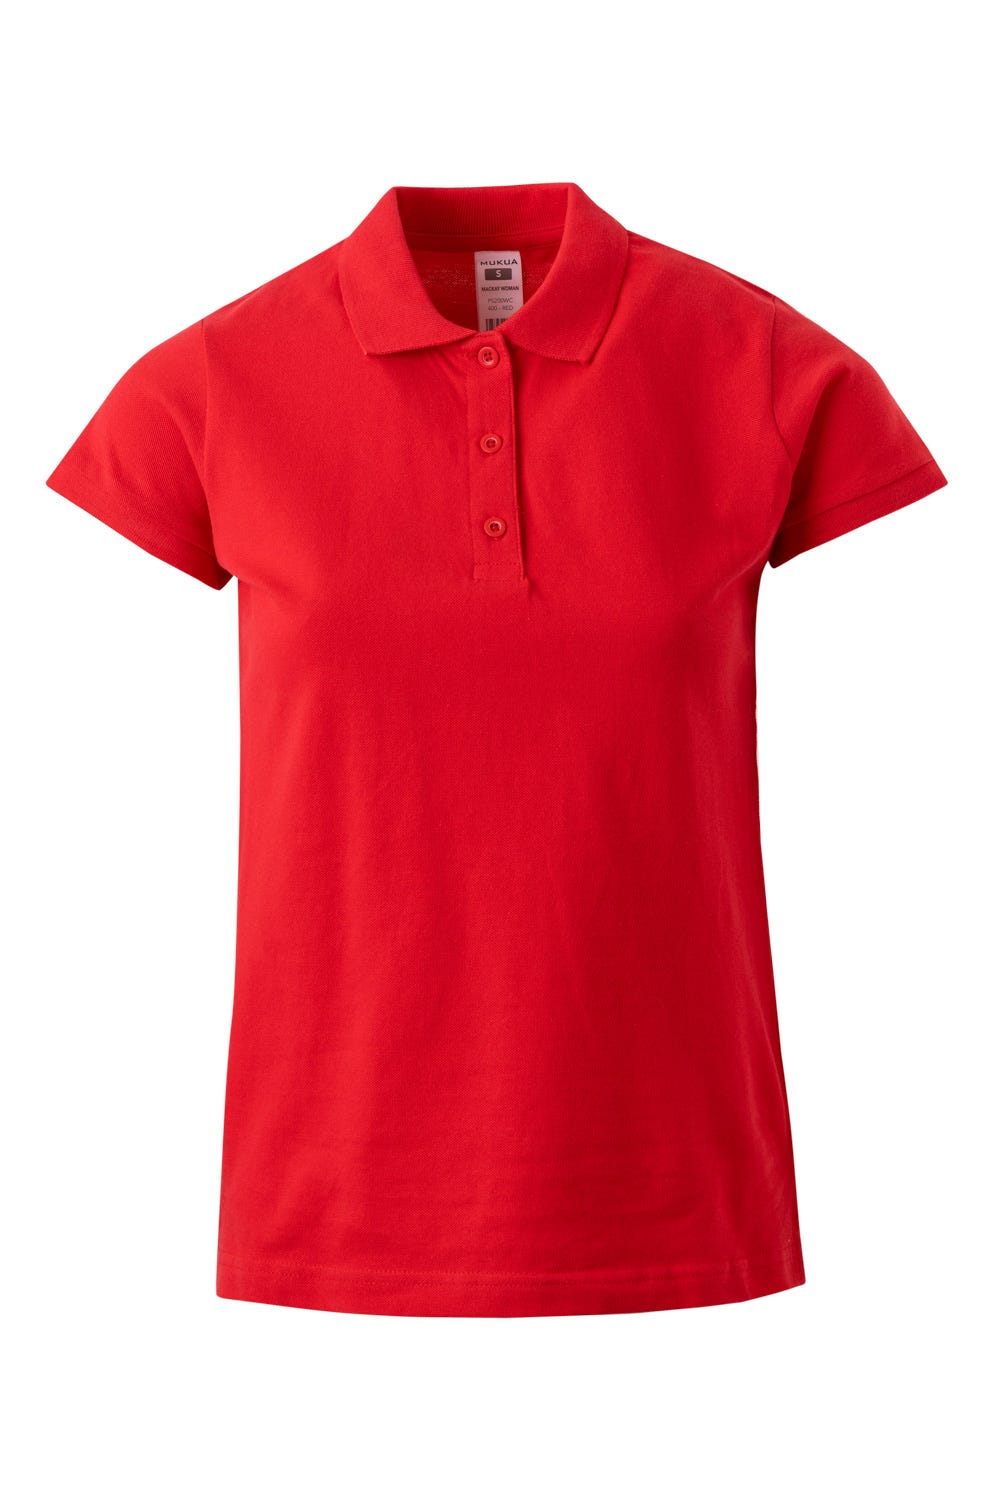 Mukua Ps200wc Polo M C Mujer 210gr AlgodÓn 100% Red